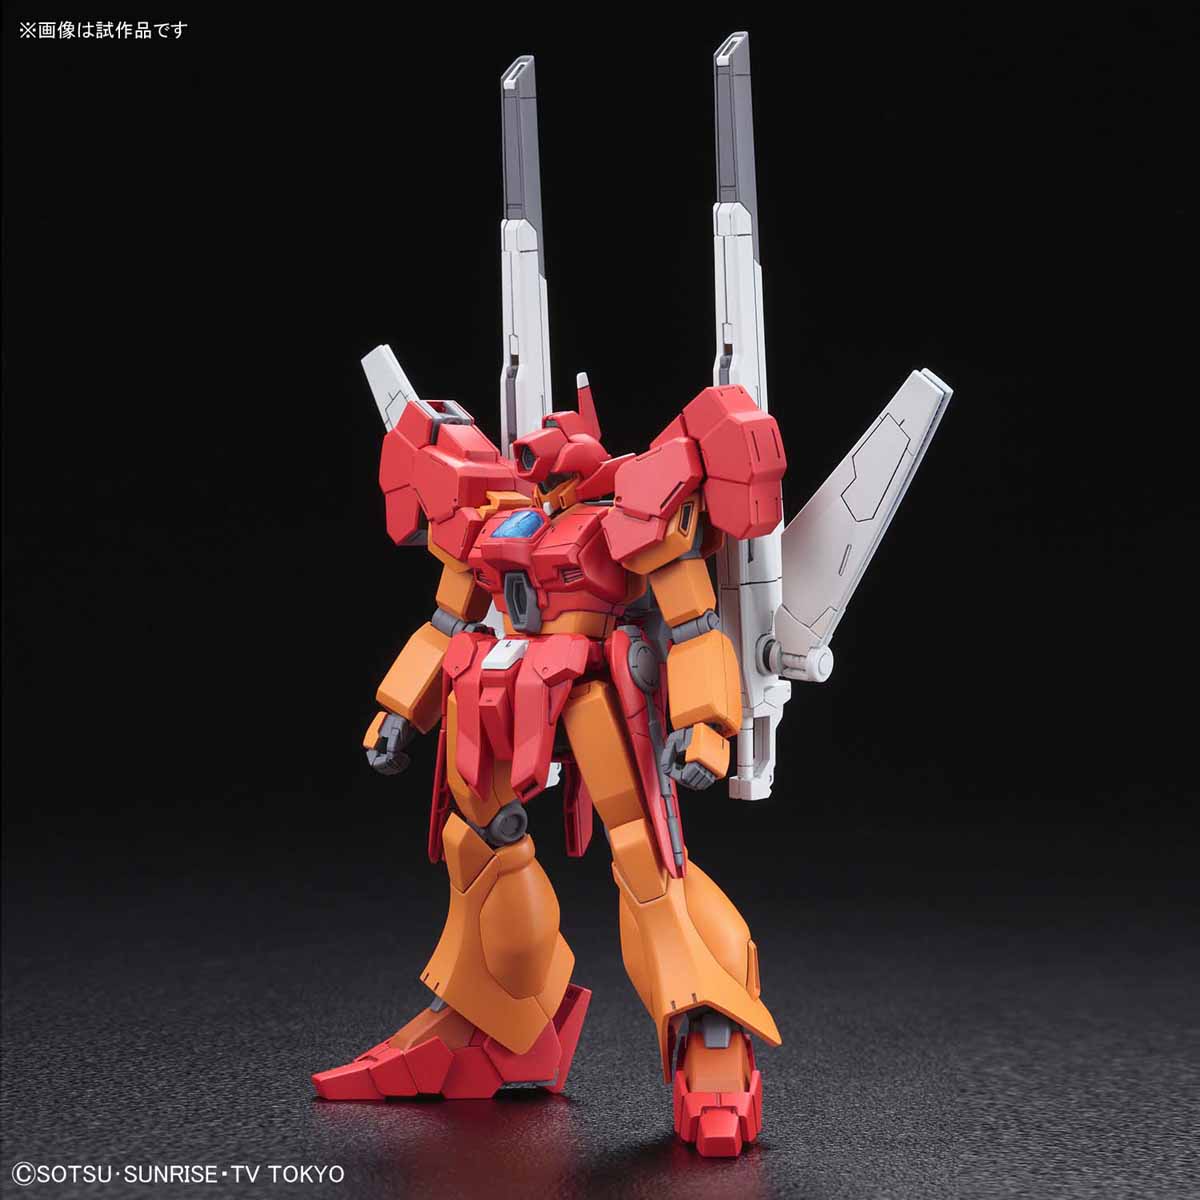 HGBD 1/144 Jegan Blast Master - Release Info - Gundam Kits Collection News and Reviews